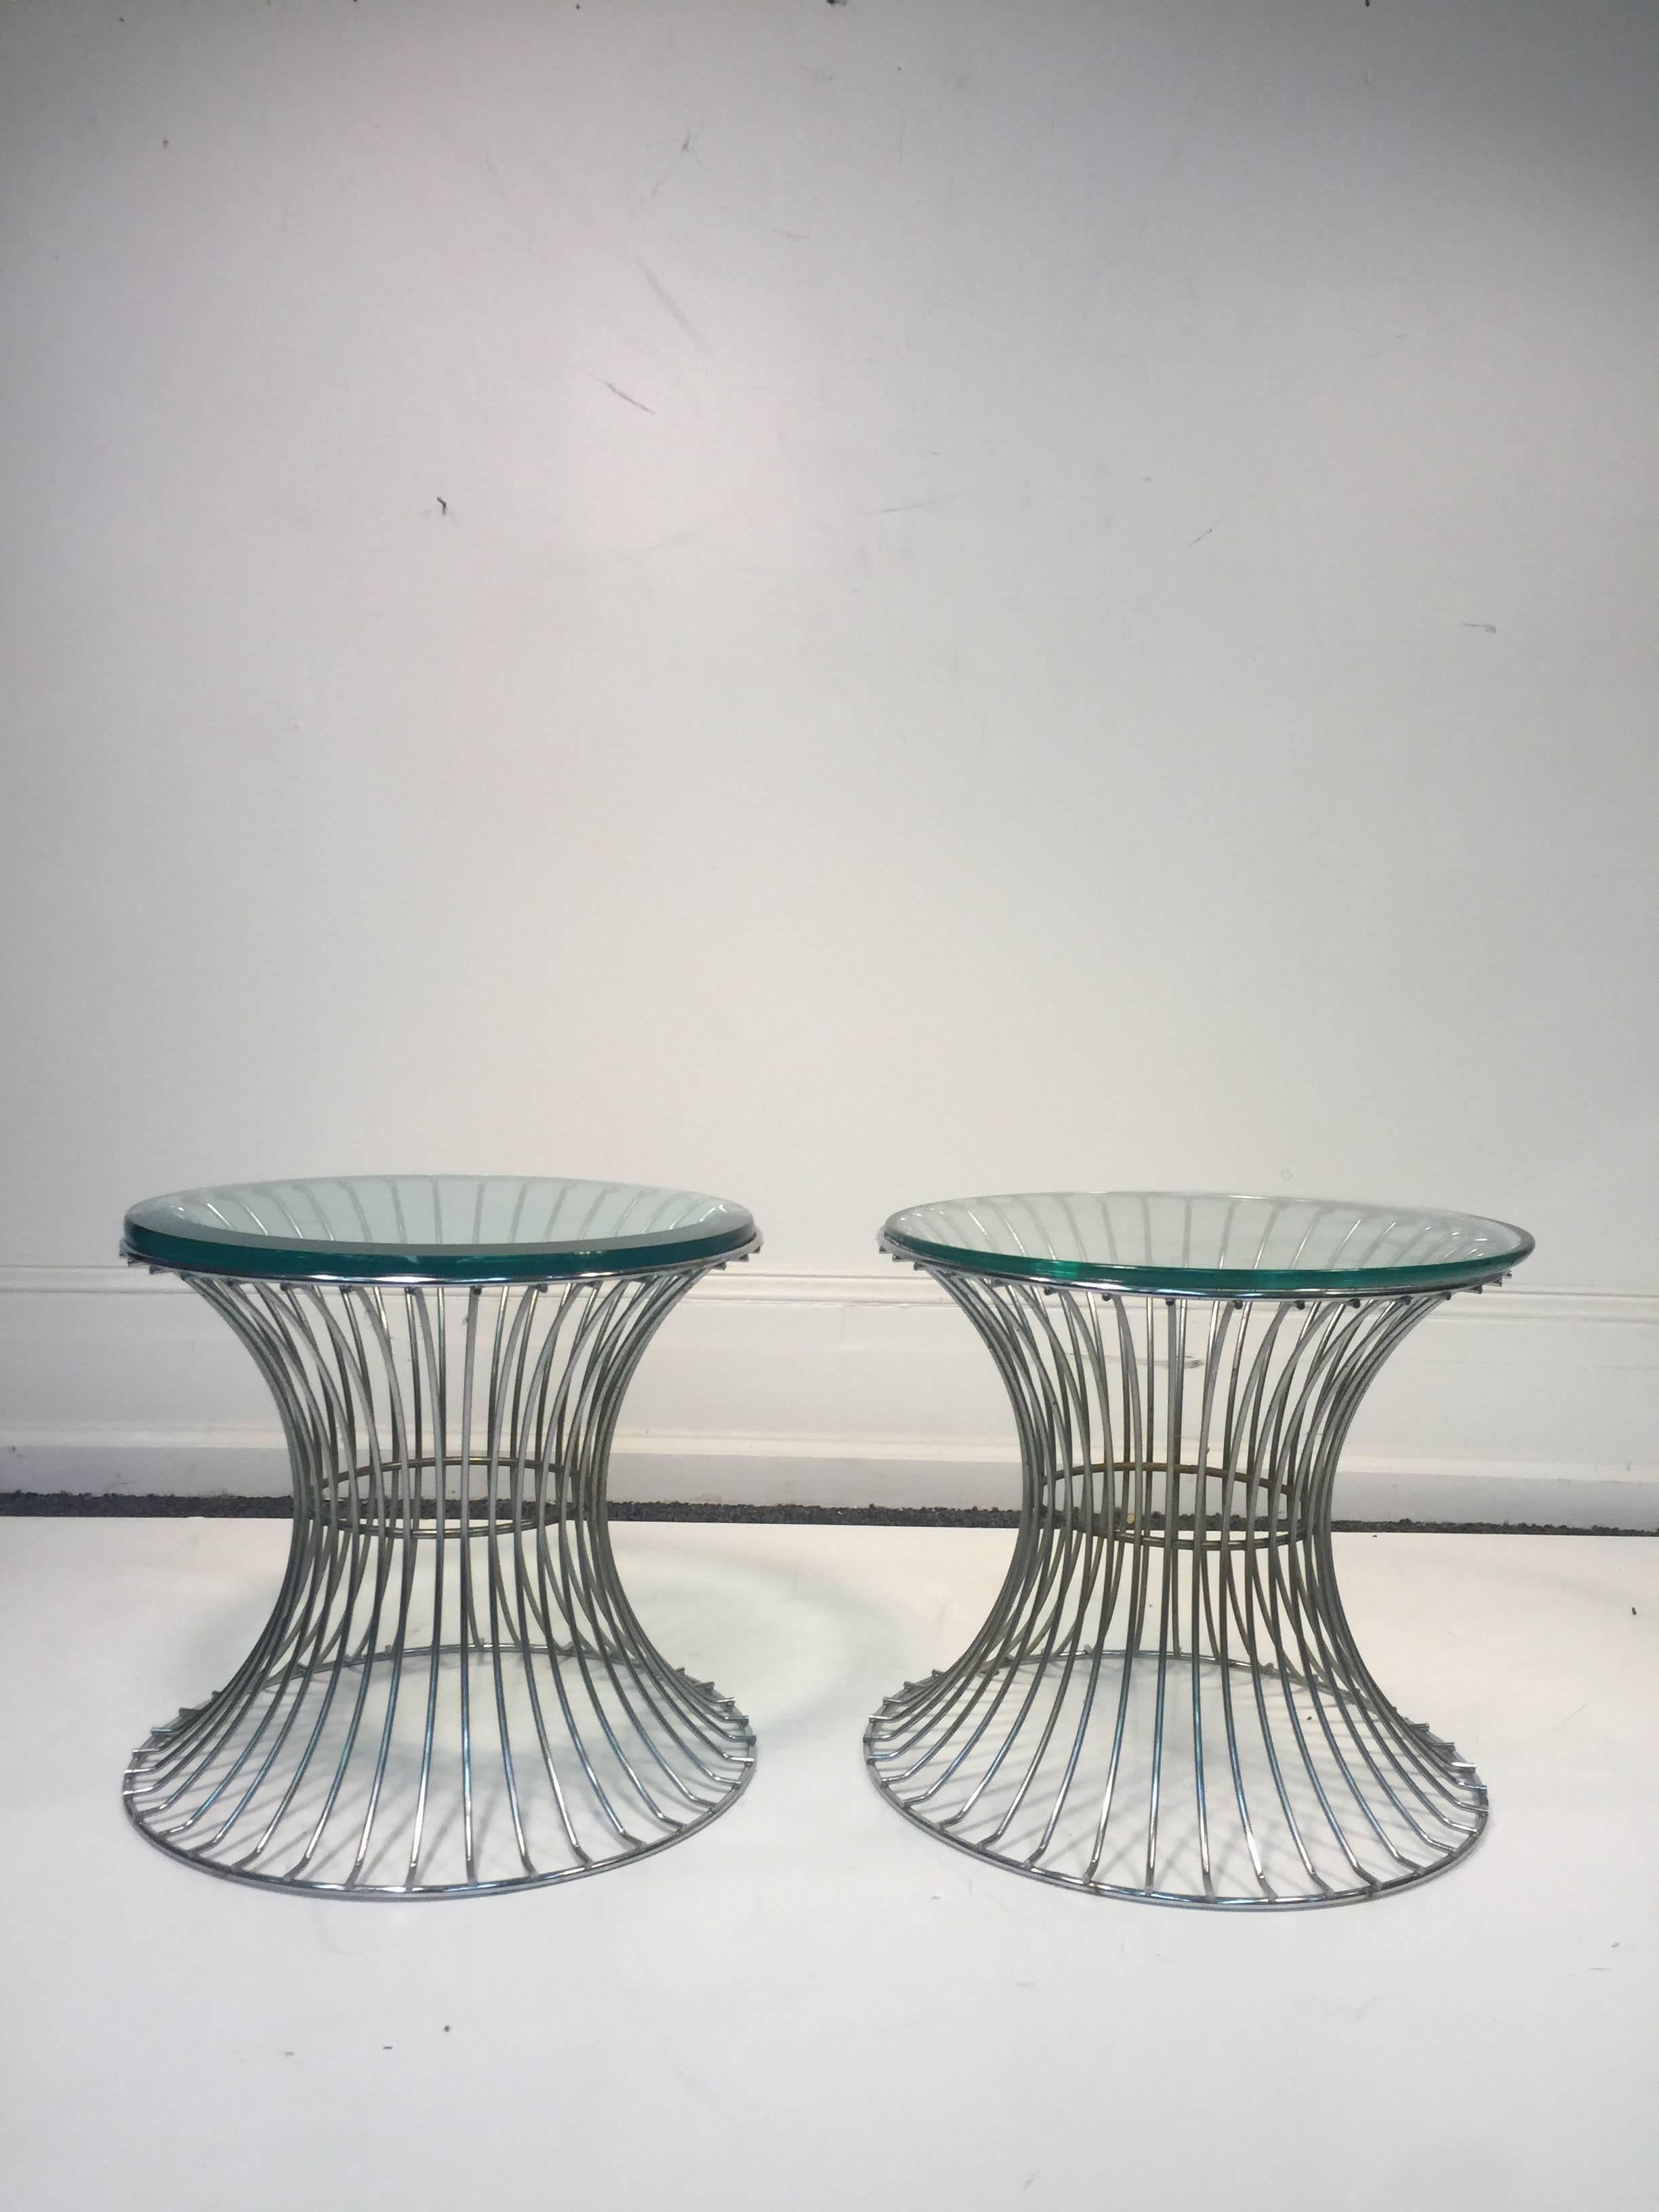 Wonderful Pair of Tables with Trumpeting Wire Bases by Warren Platner for Knoll In Good Condition For Sale In Mount Penn, PA